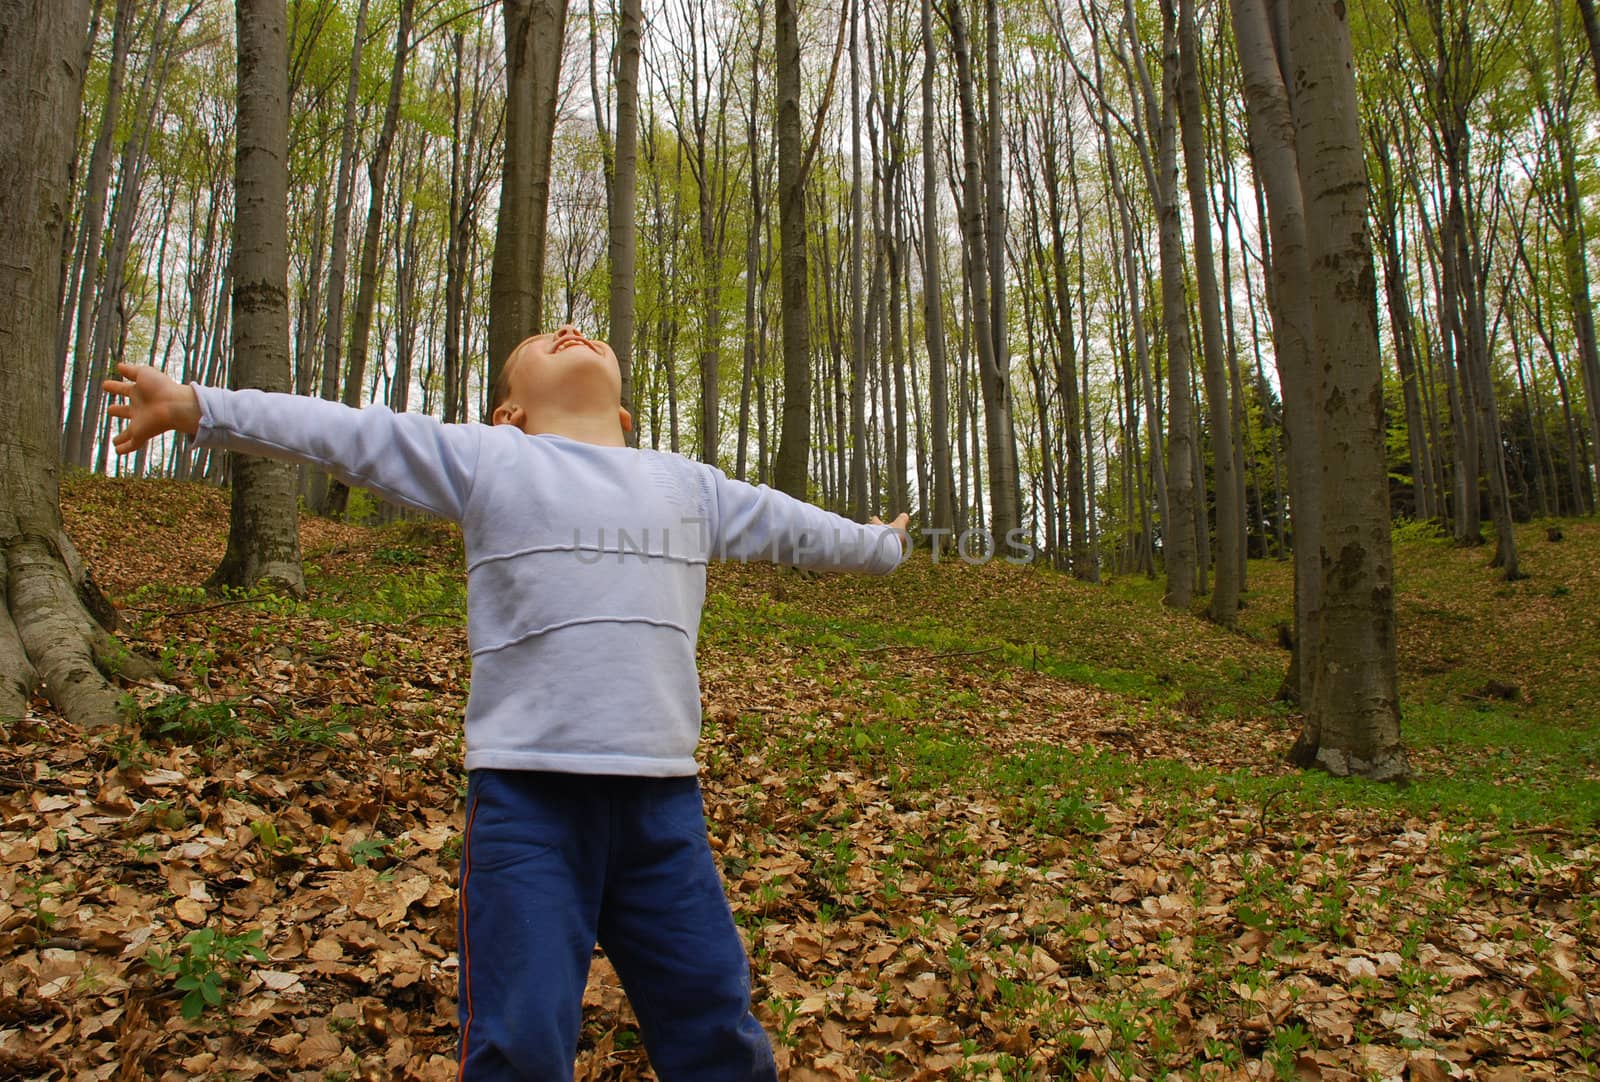 a boy is standing in the woods with arms spread, breathing the air